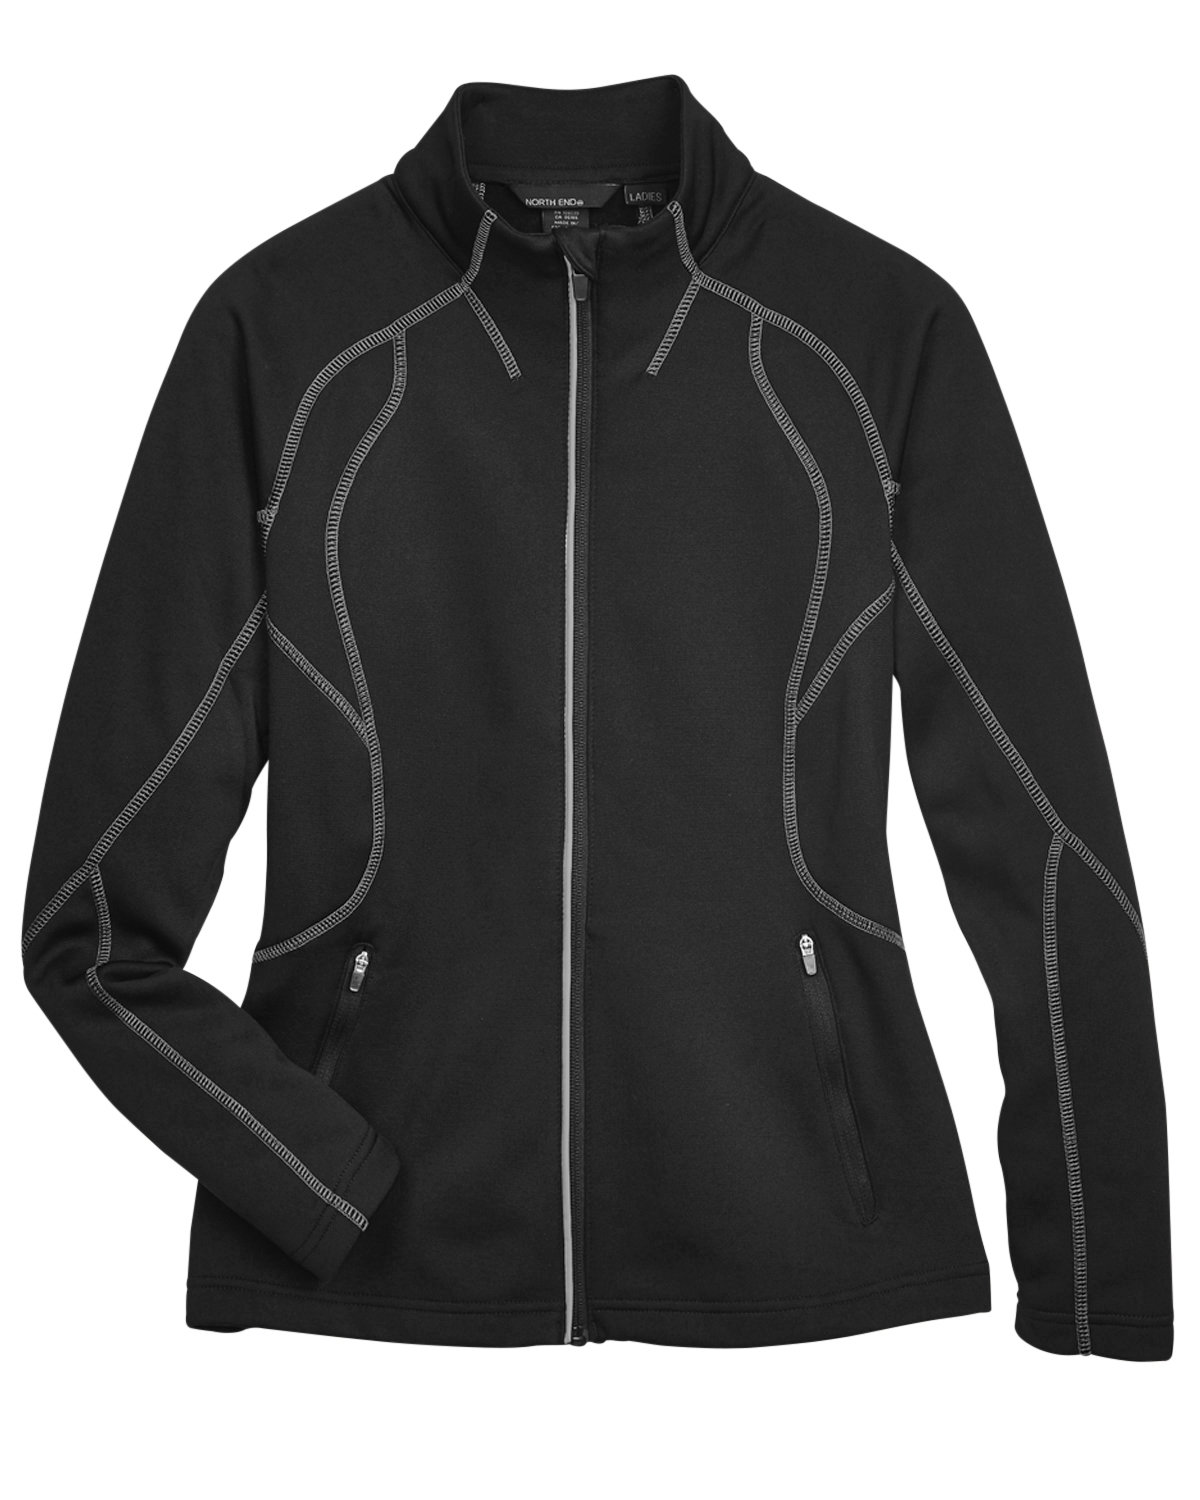 Picture of North End Ladies' Gravity Performance Fleece Jacket